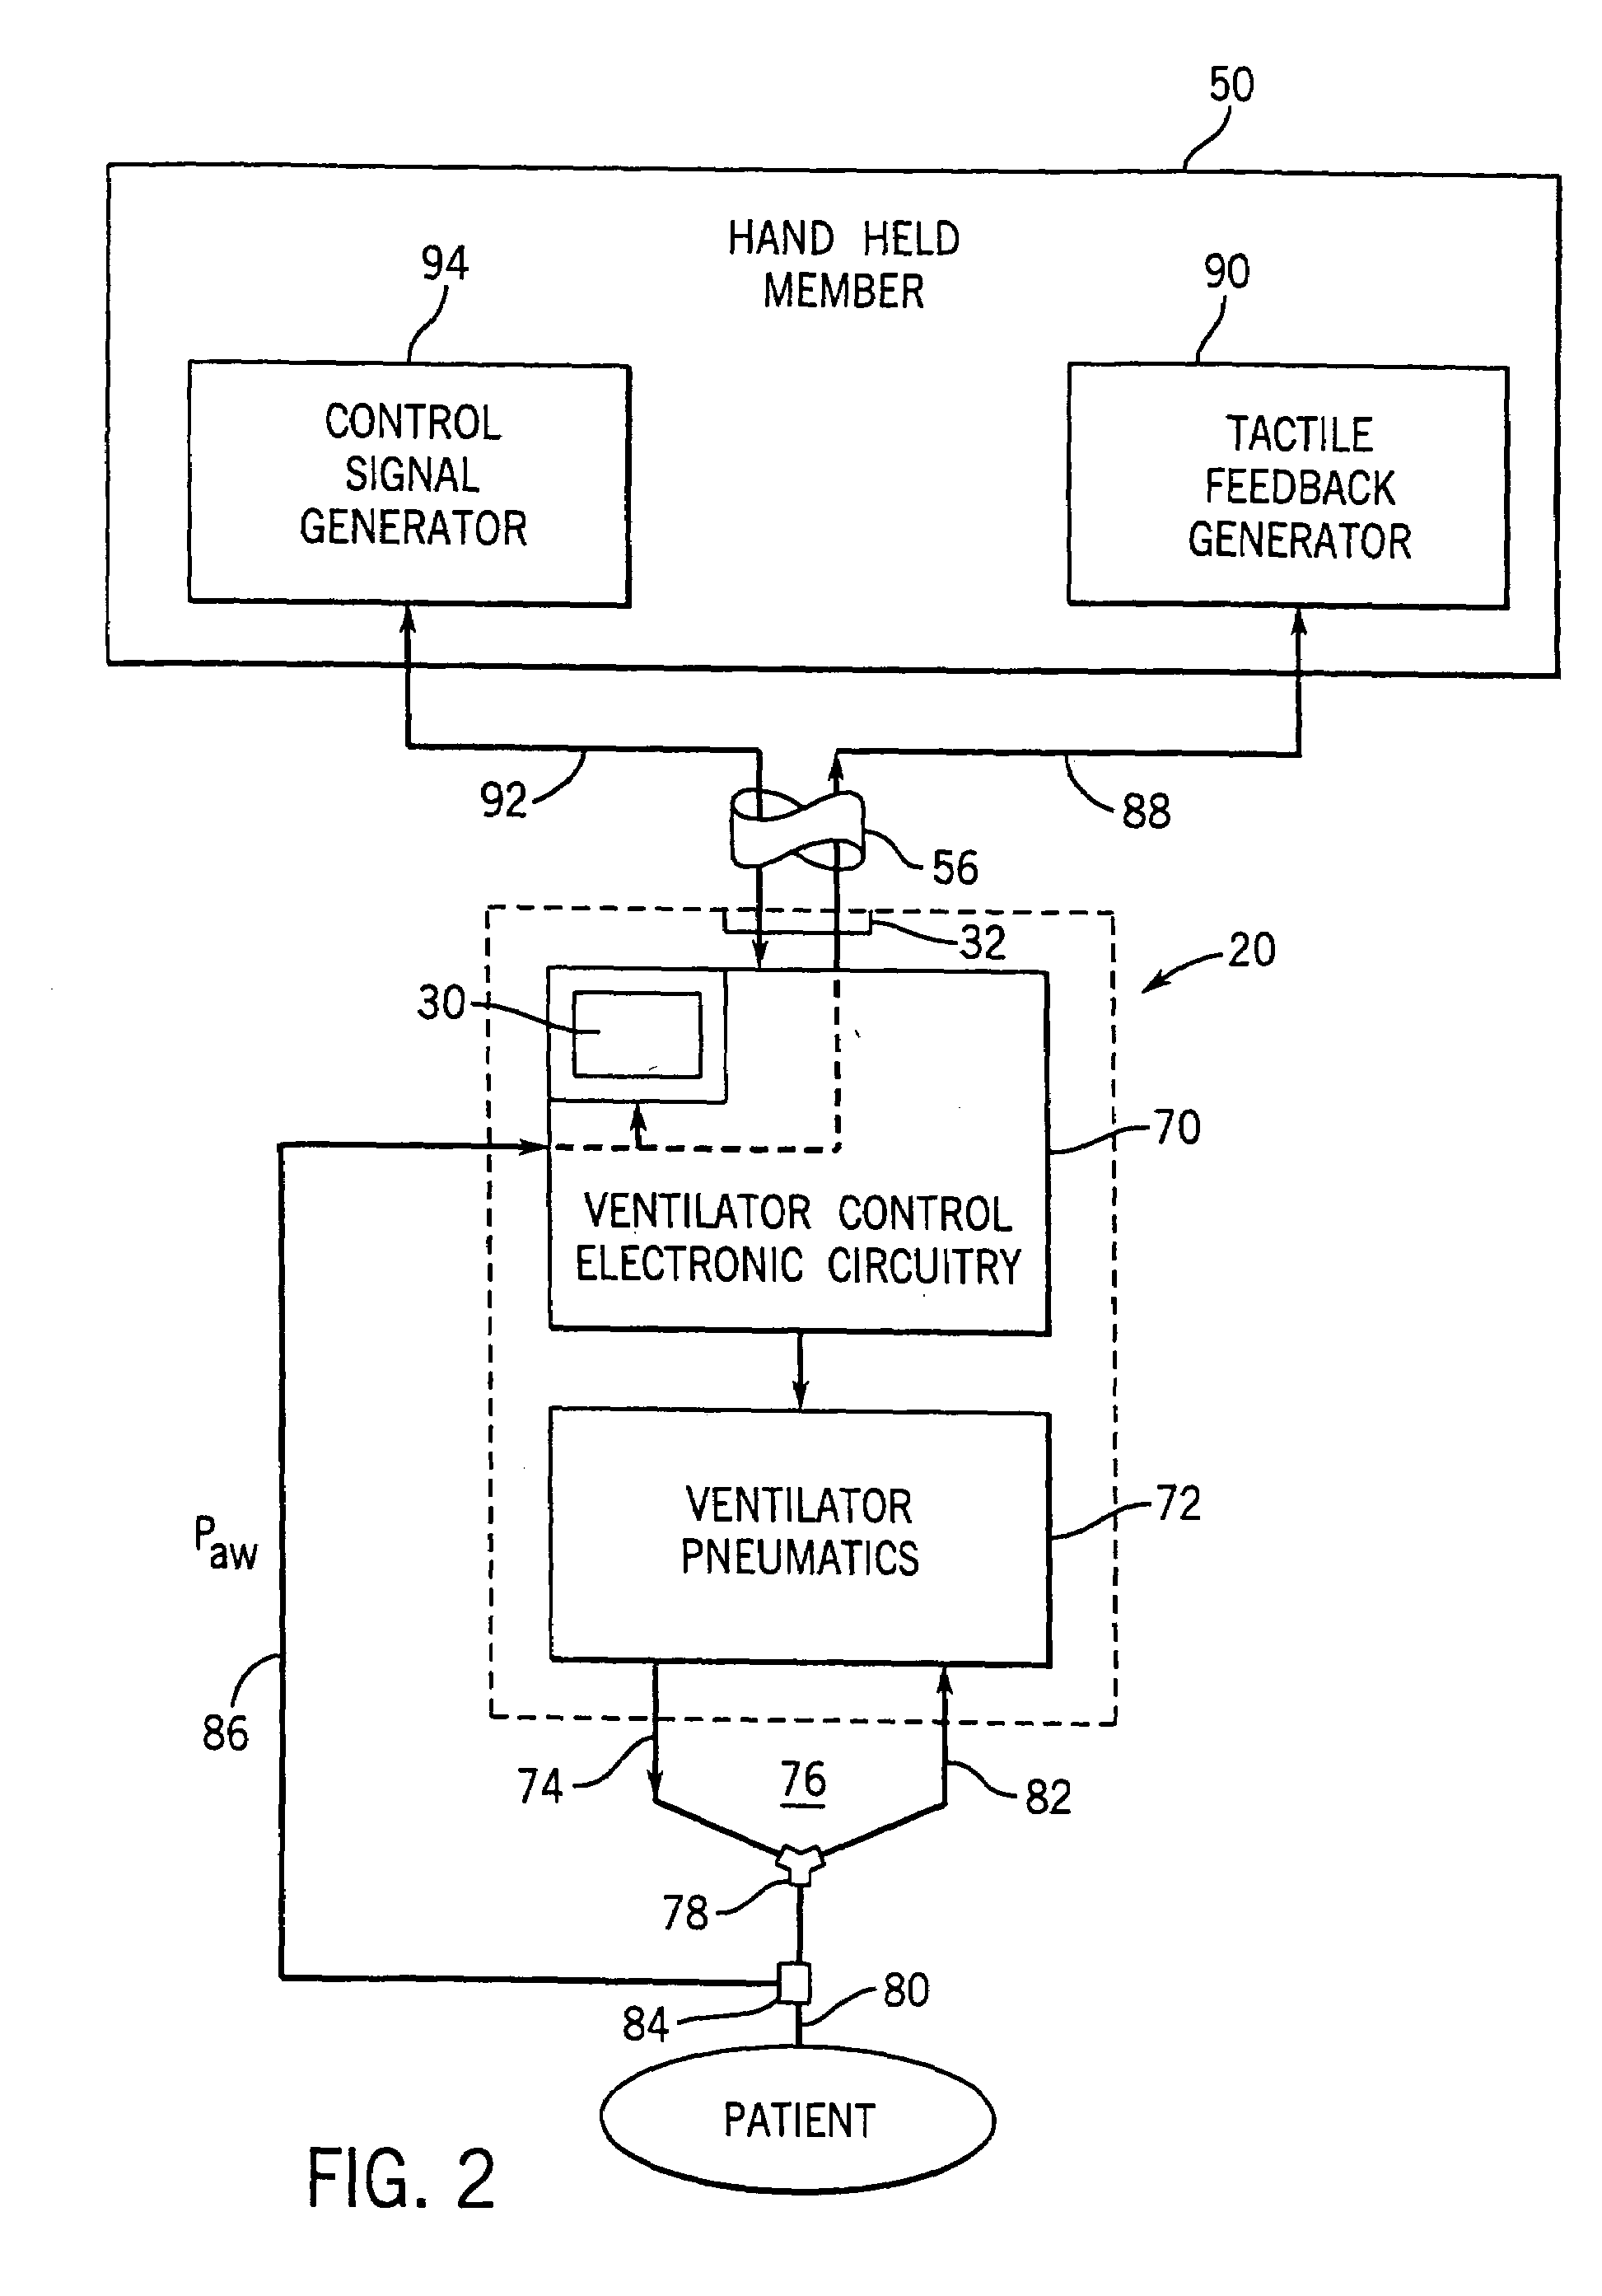 Remote control and tactile feedback system and method for medical apparatus